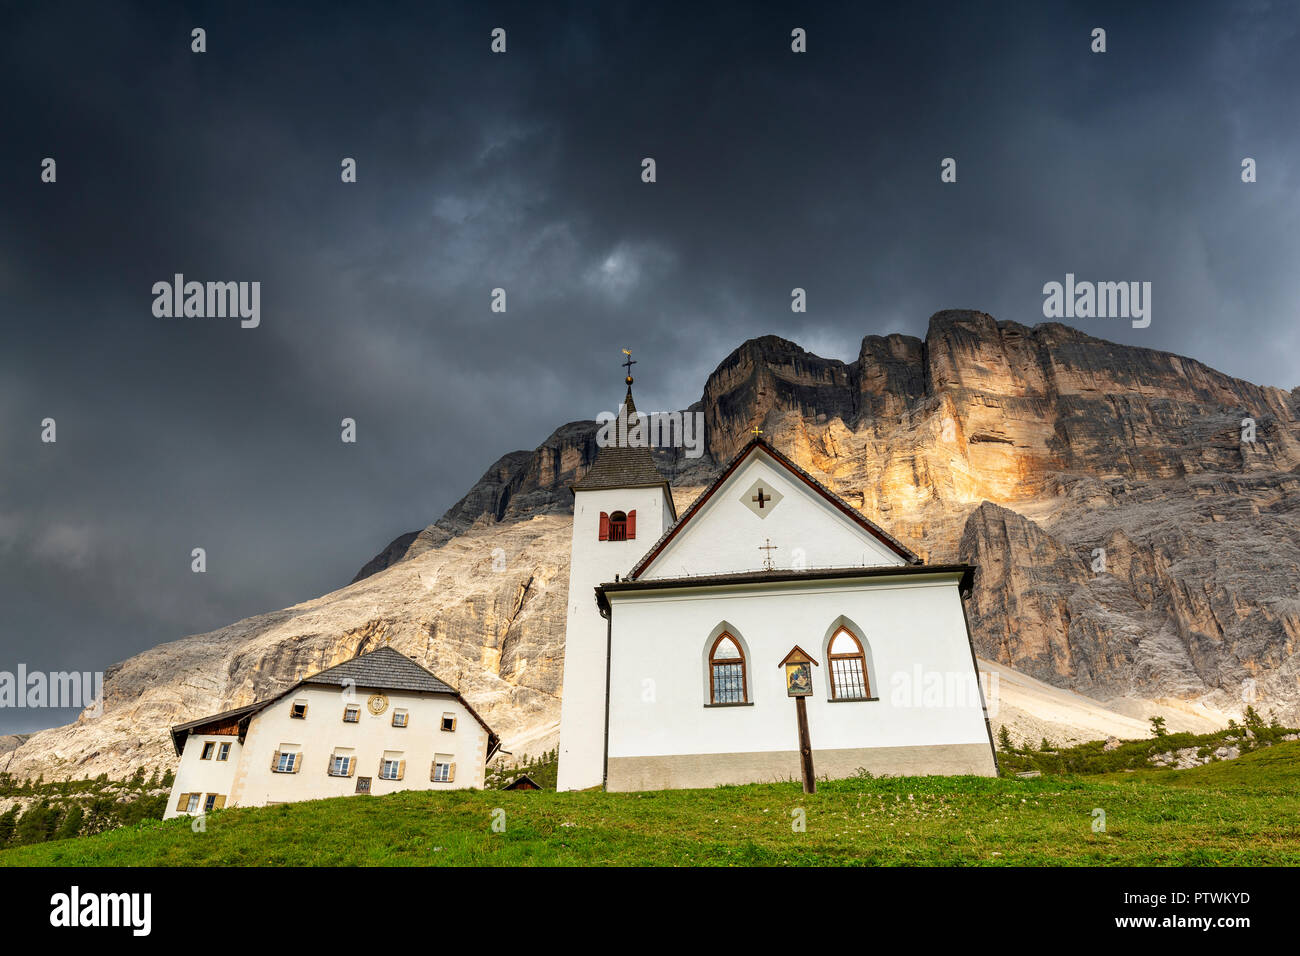 Santa Croce Sanctuary with coming thunderstorm. La Valle/La Val/Wengen Badia Valley, South Tyrol, Dolomites, Italy, Europe. Stock Photo